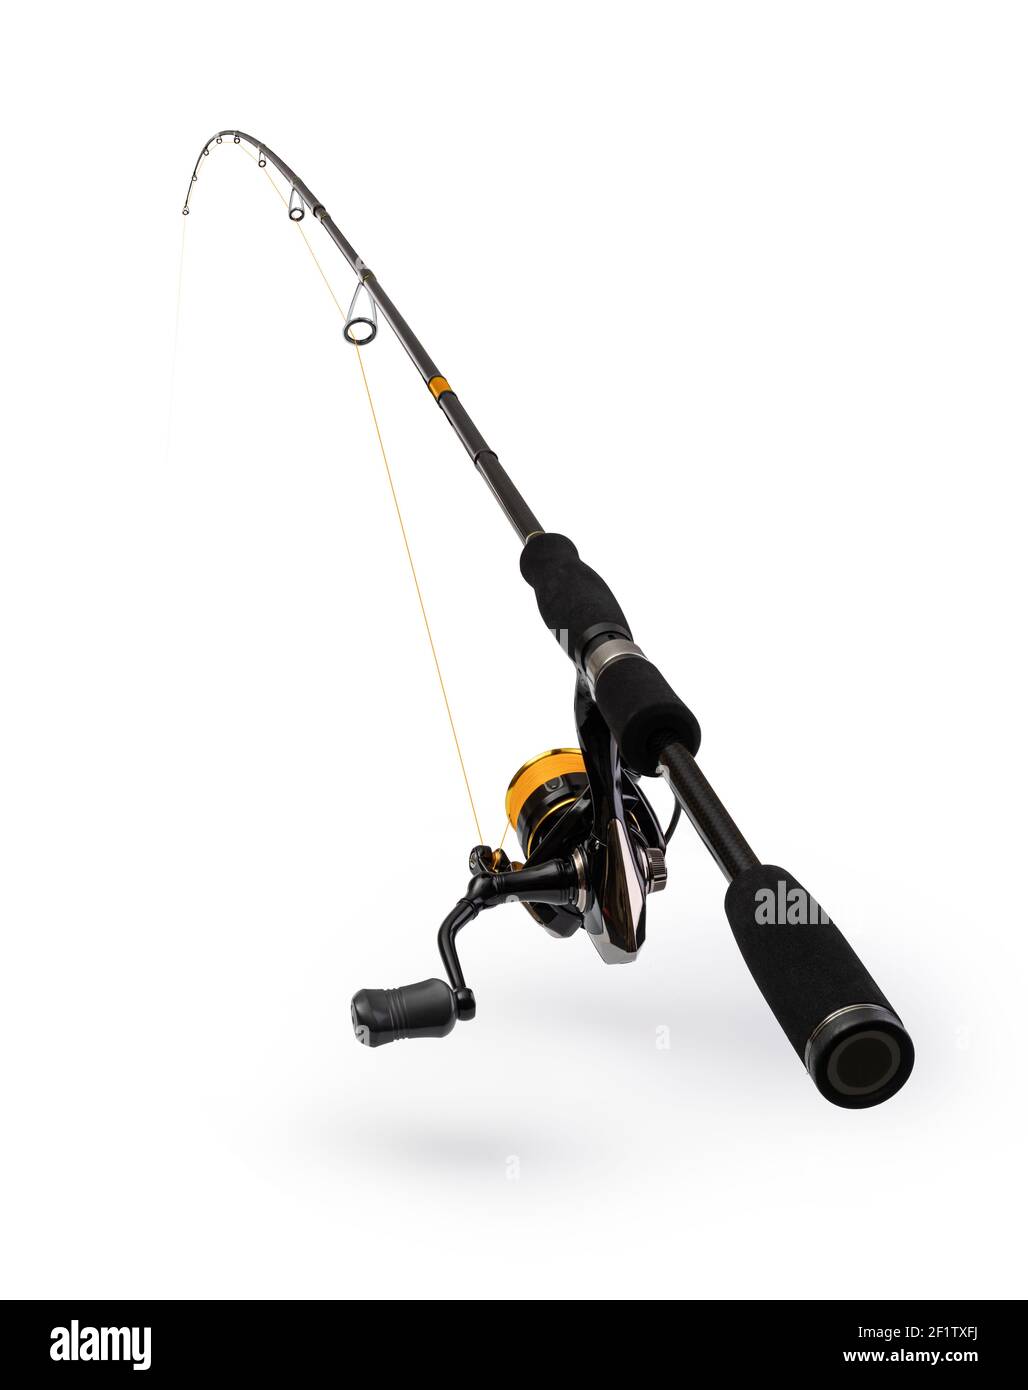 Fishing pole isolated Cut Out Stock Images & Pictures - Page 3 - Alamy